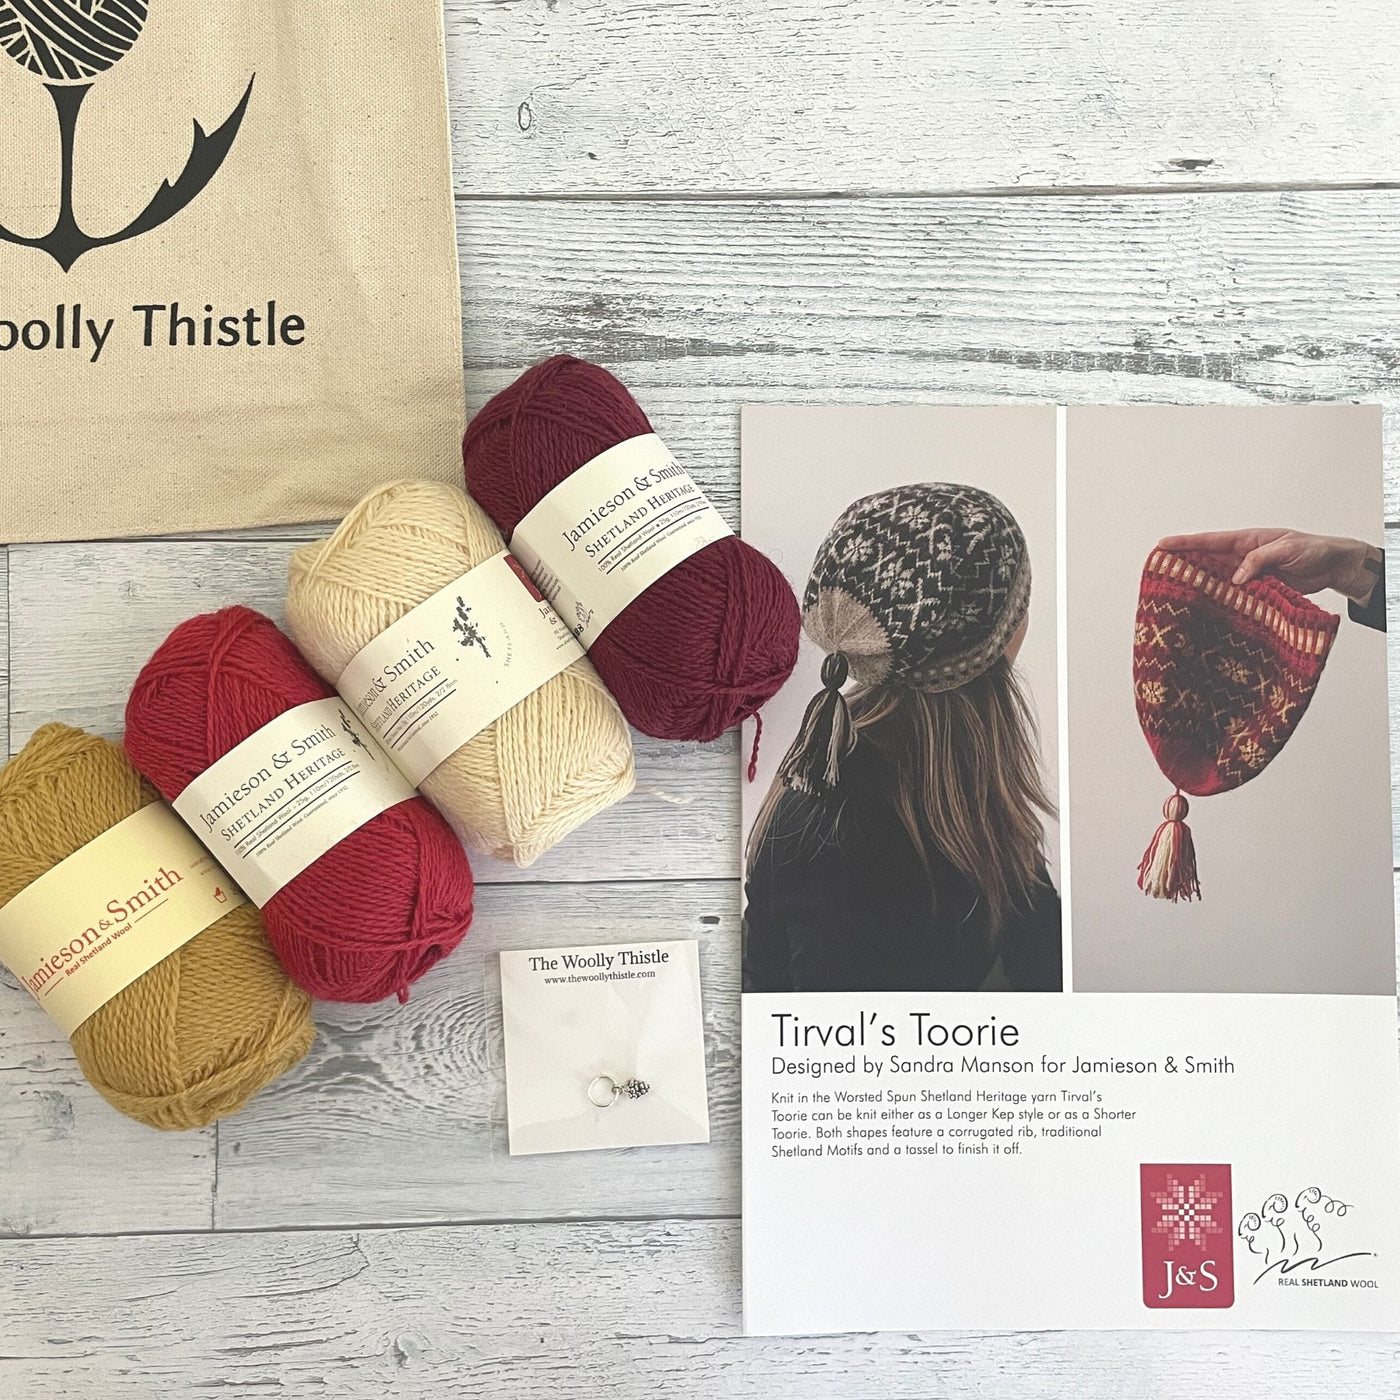 Components of the Tirval's Toorie Kit. Jamieson & Smith Heritage yarn in Berry, Wine colorway shown with The Woolly Thistle Tote Bag, Stitch Marker, and the printed pattern for Tirval's Toorie.. 